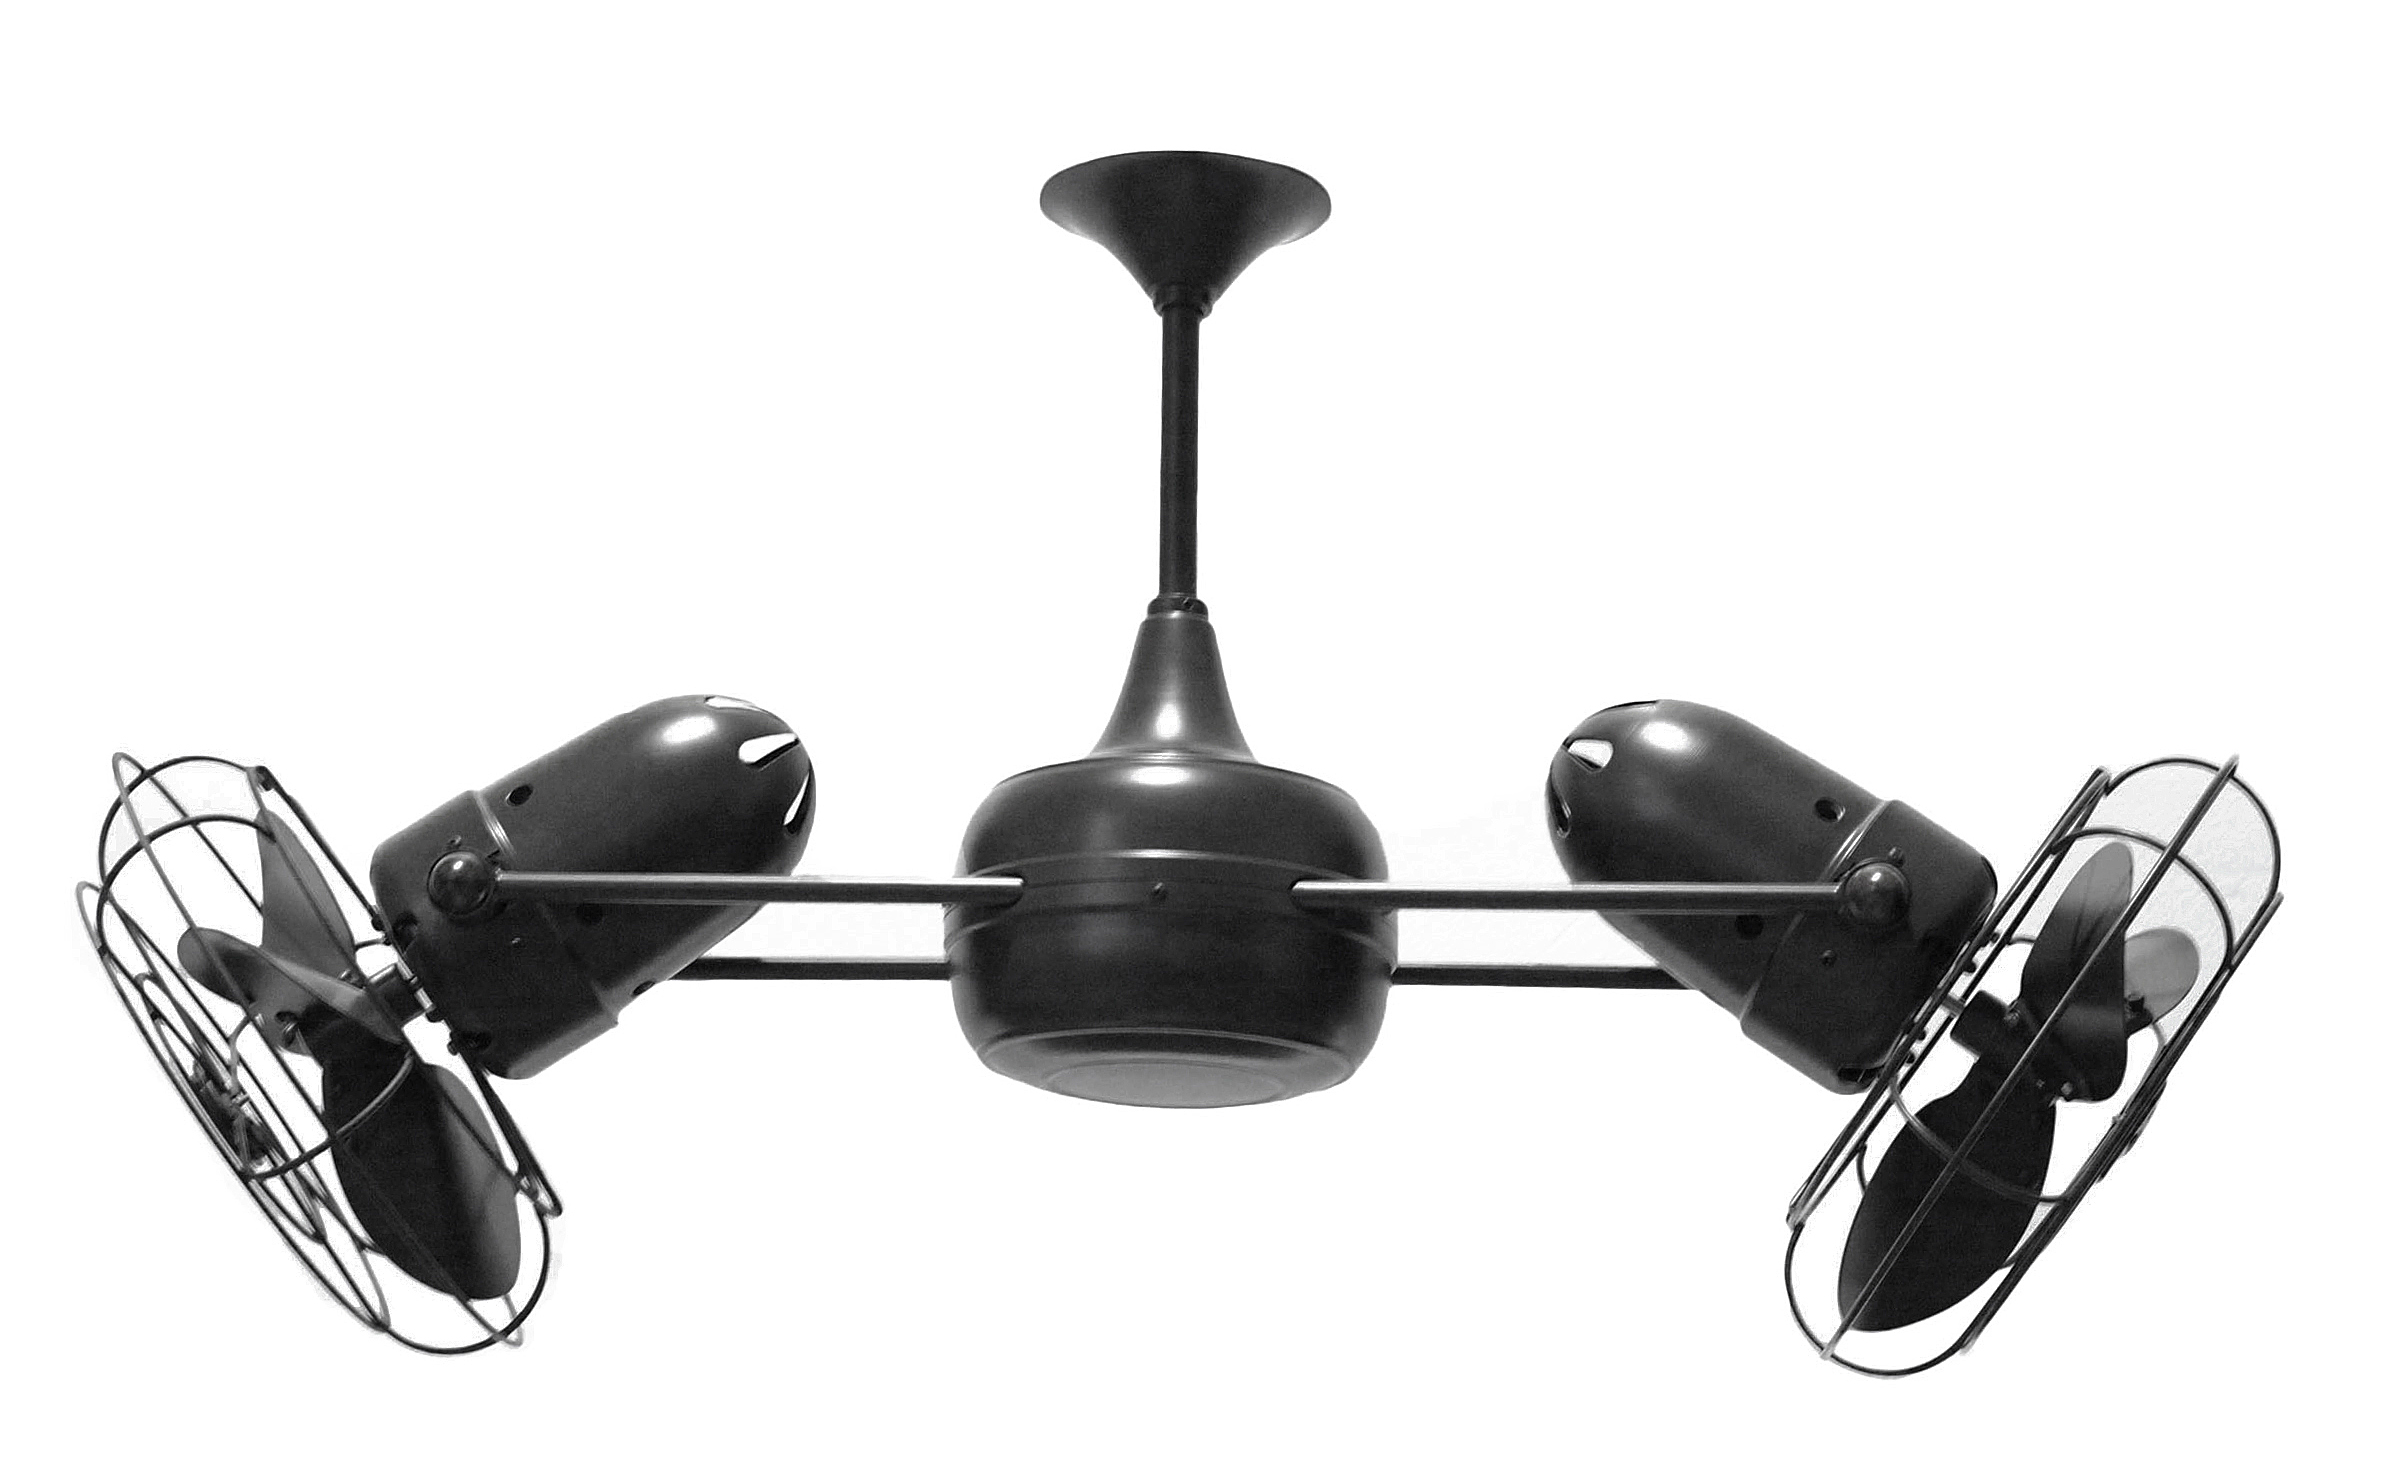 Duplo Dinamico rotational dual head ceiling fan in Black finish with Metal blades made by Matthews Fan Company.